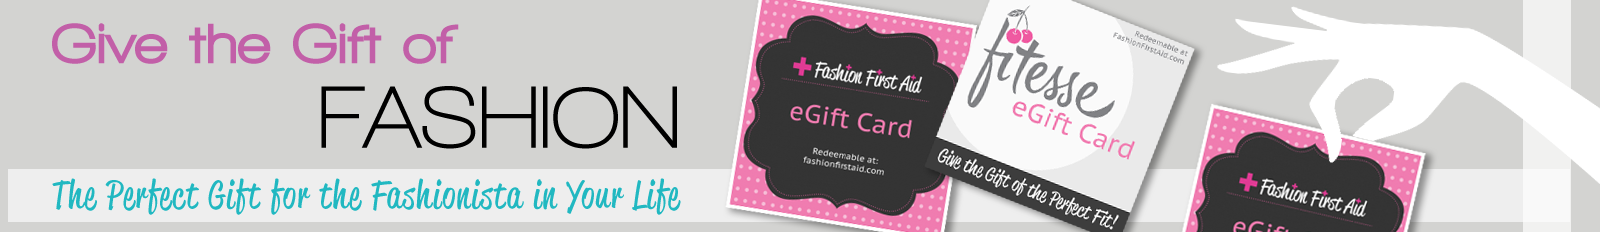 ffa-home-banner-giftcard